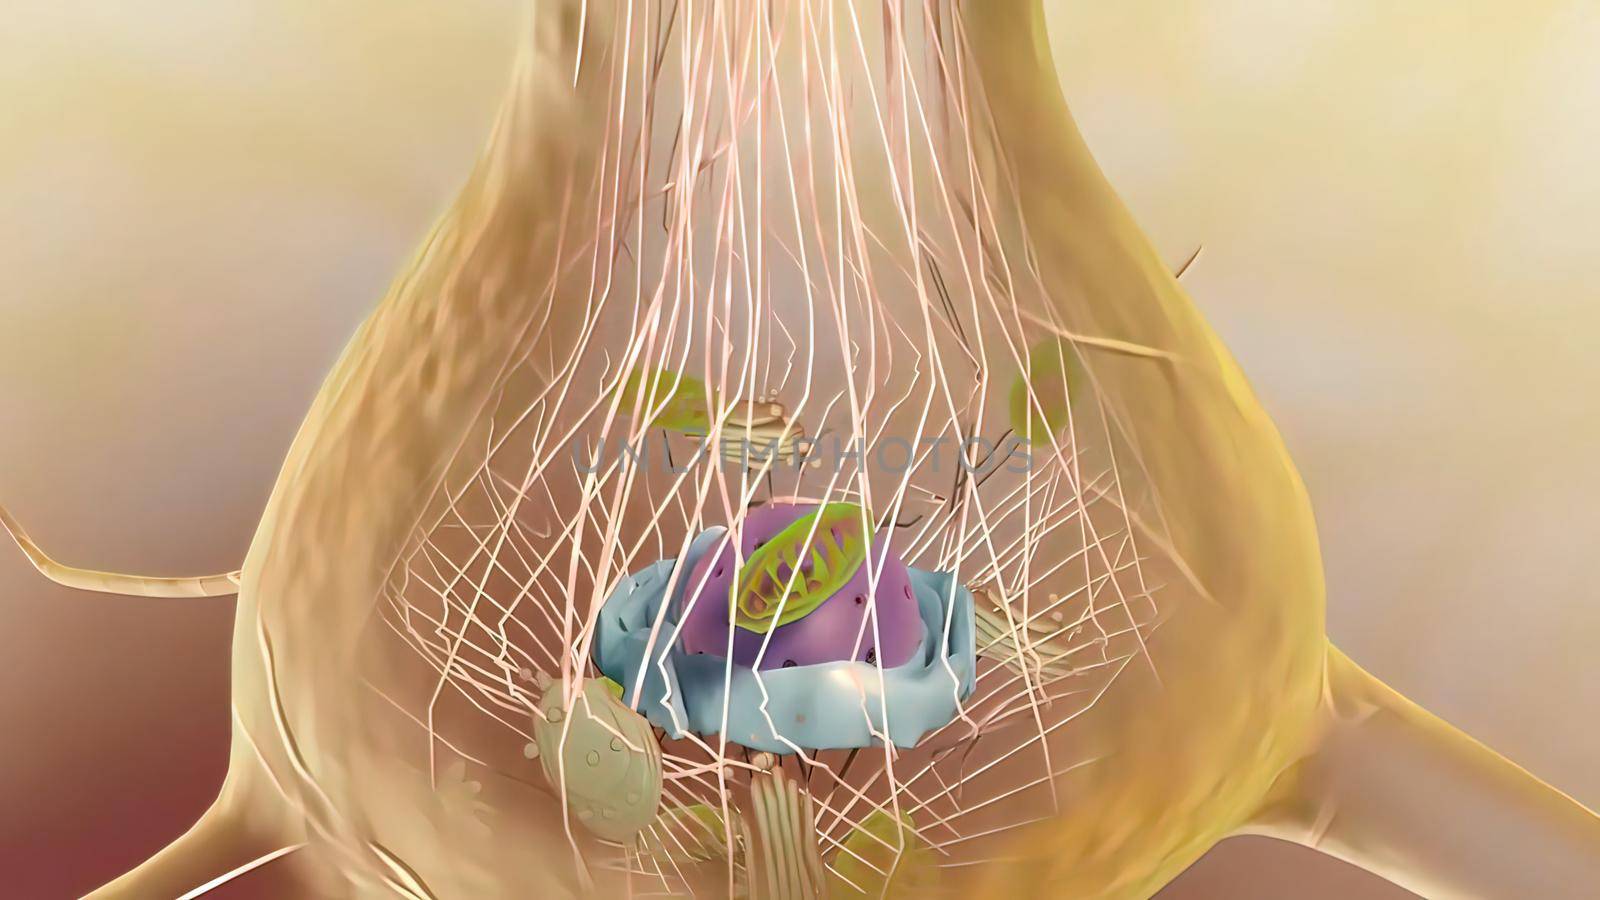 Microtubules are major components of the cytoskeleton 3D illustration